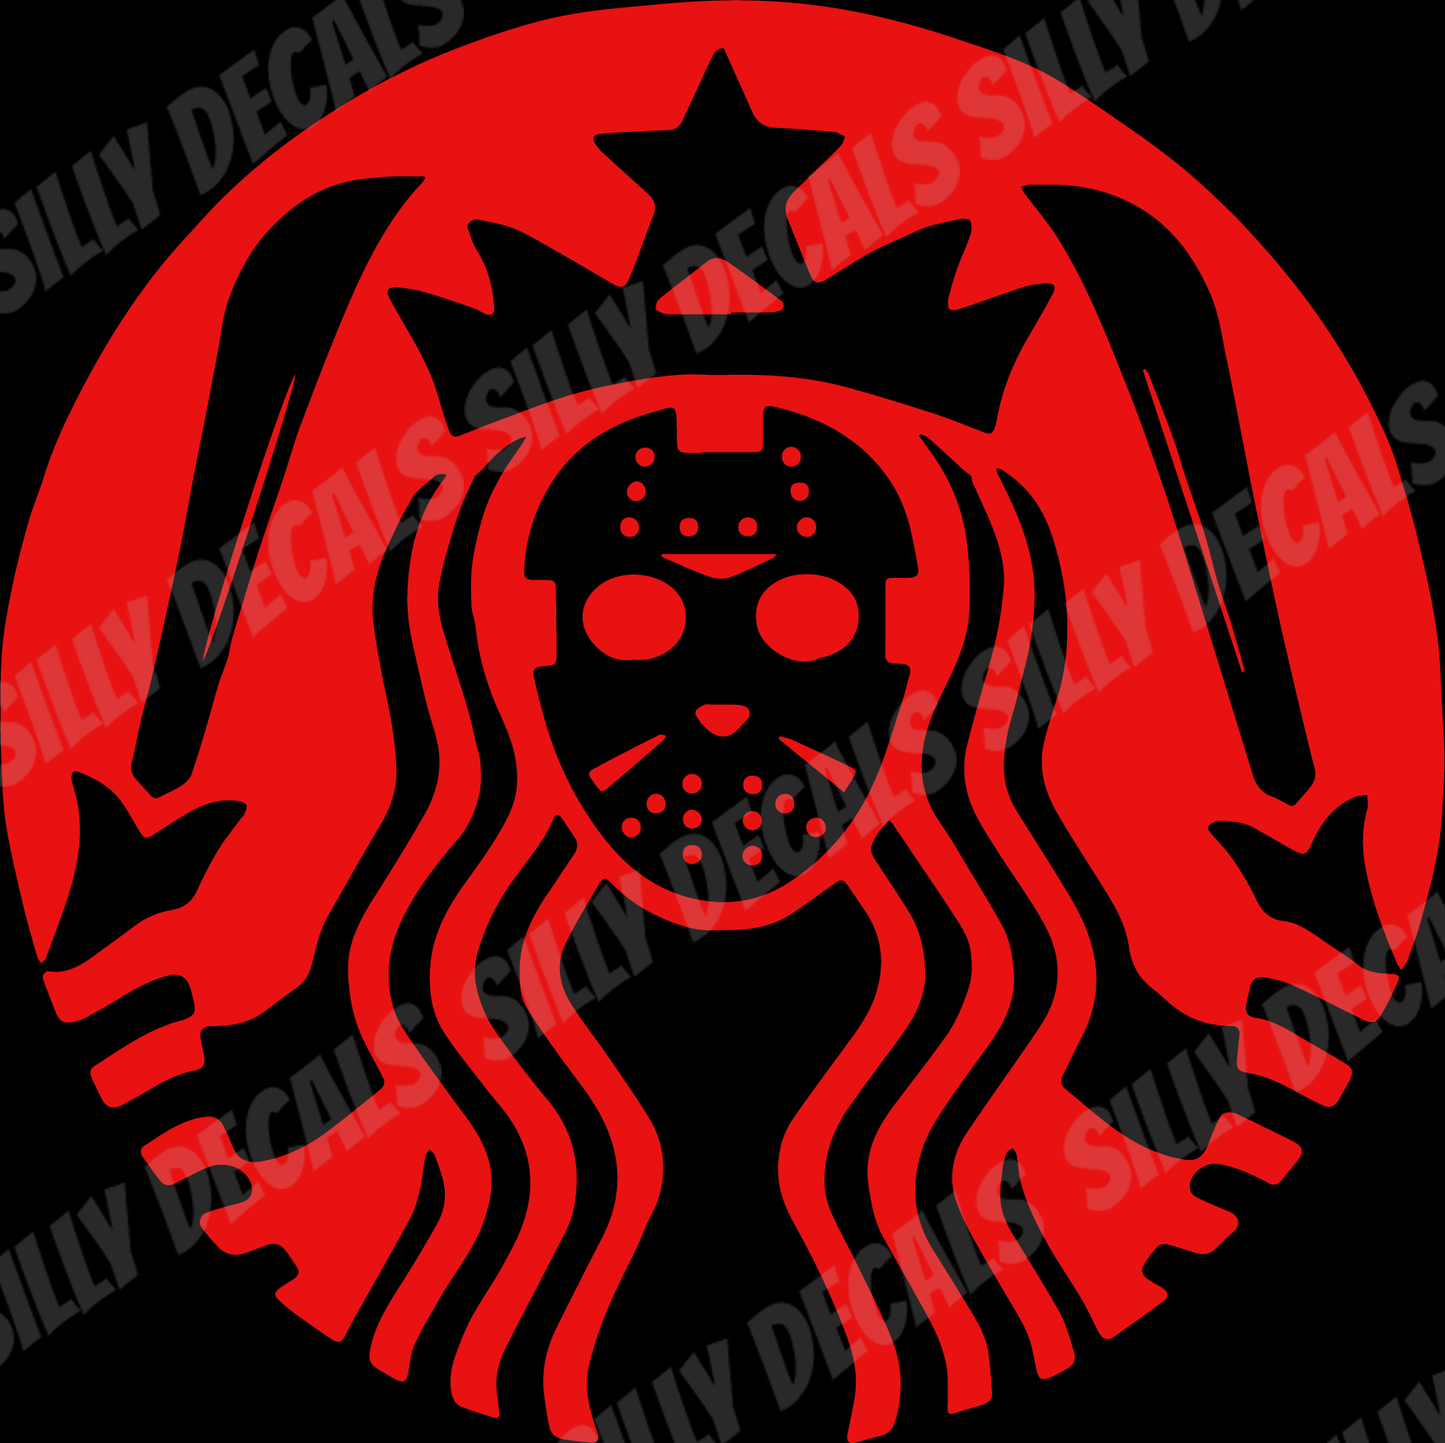 Scary Coffee Character; Funny Halloween Horror Vinyl Decals Suitable For Cars, Windows, Walls, and More!